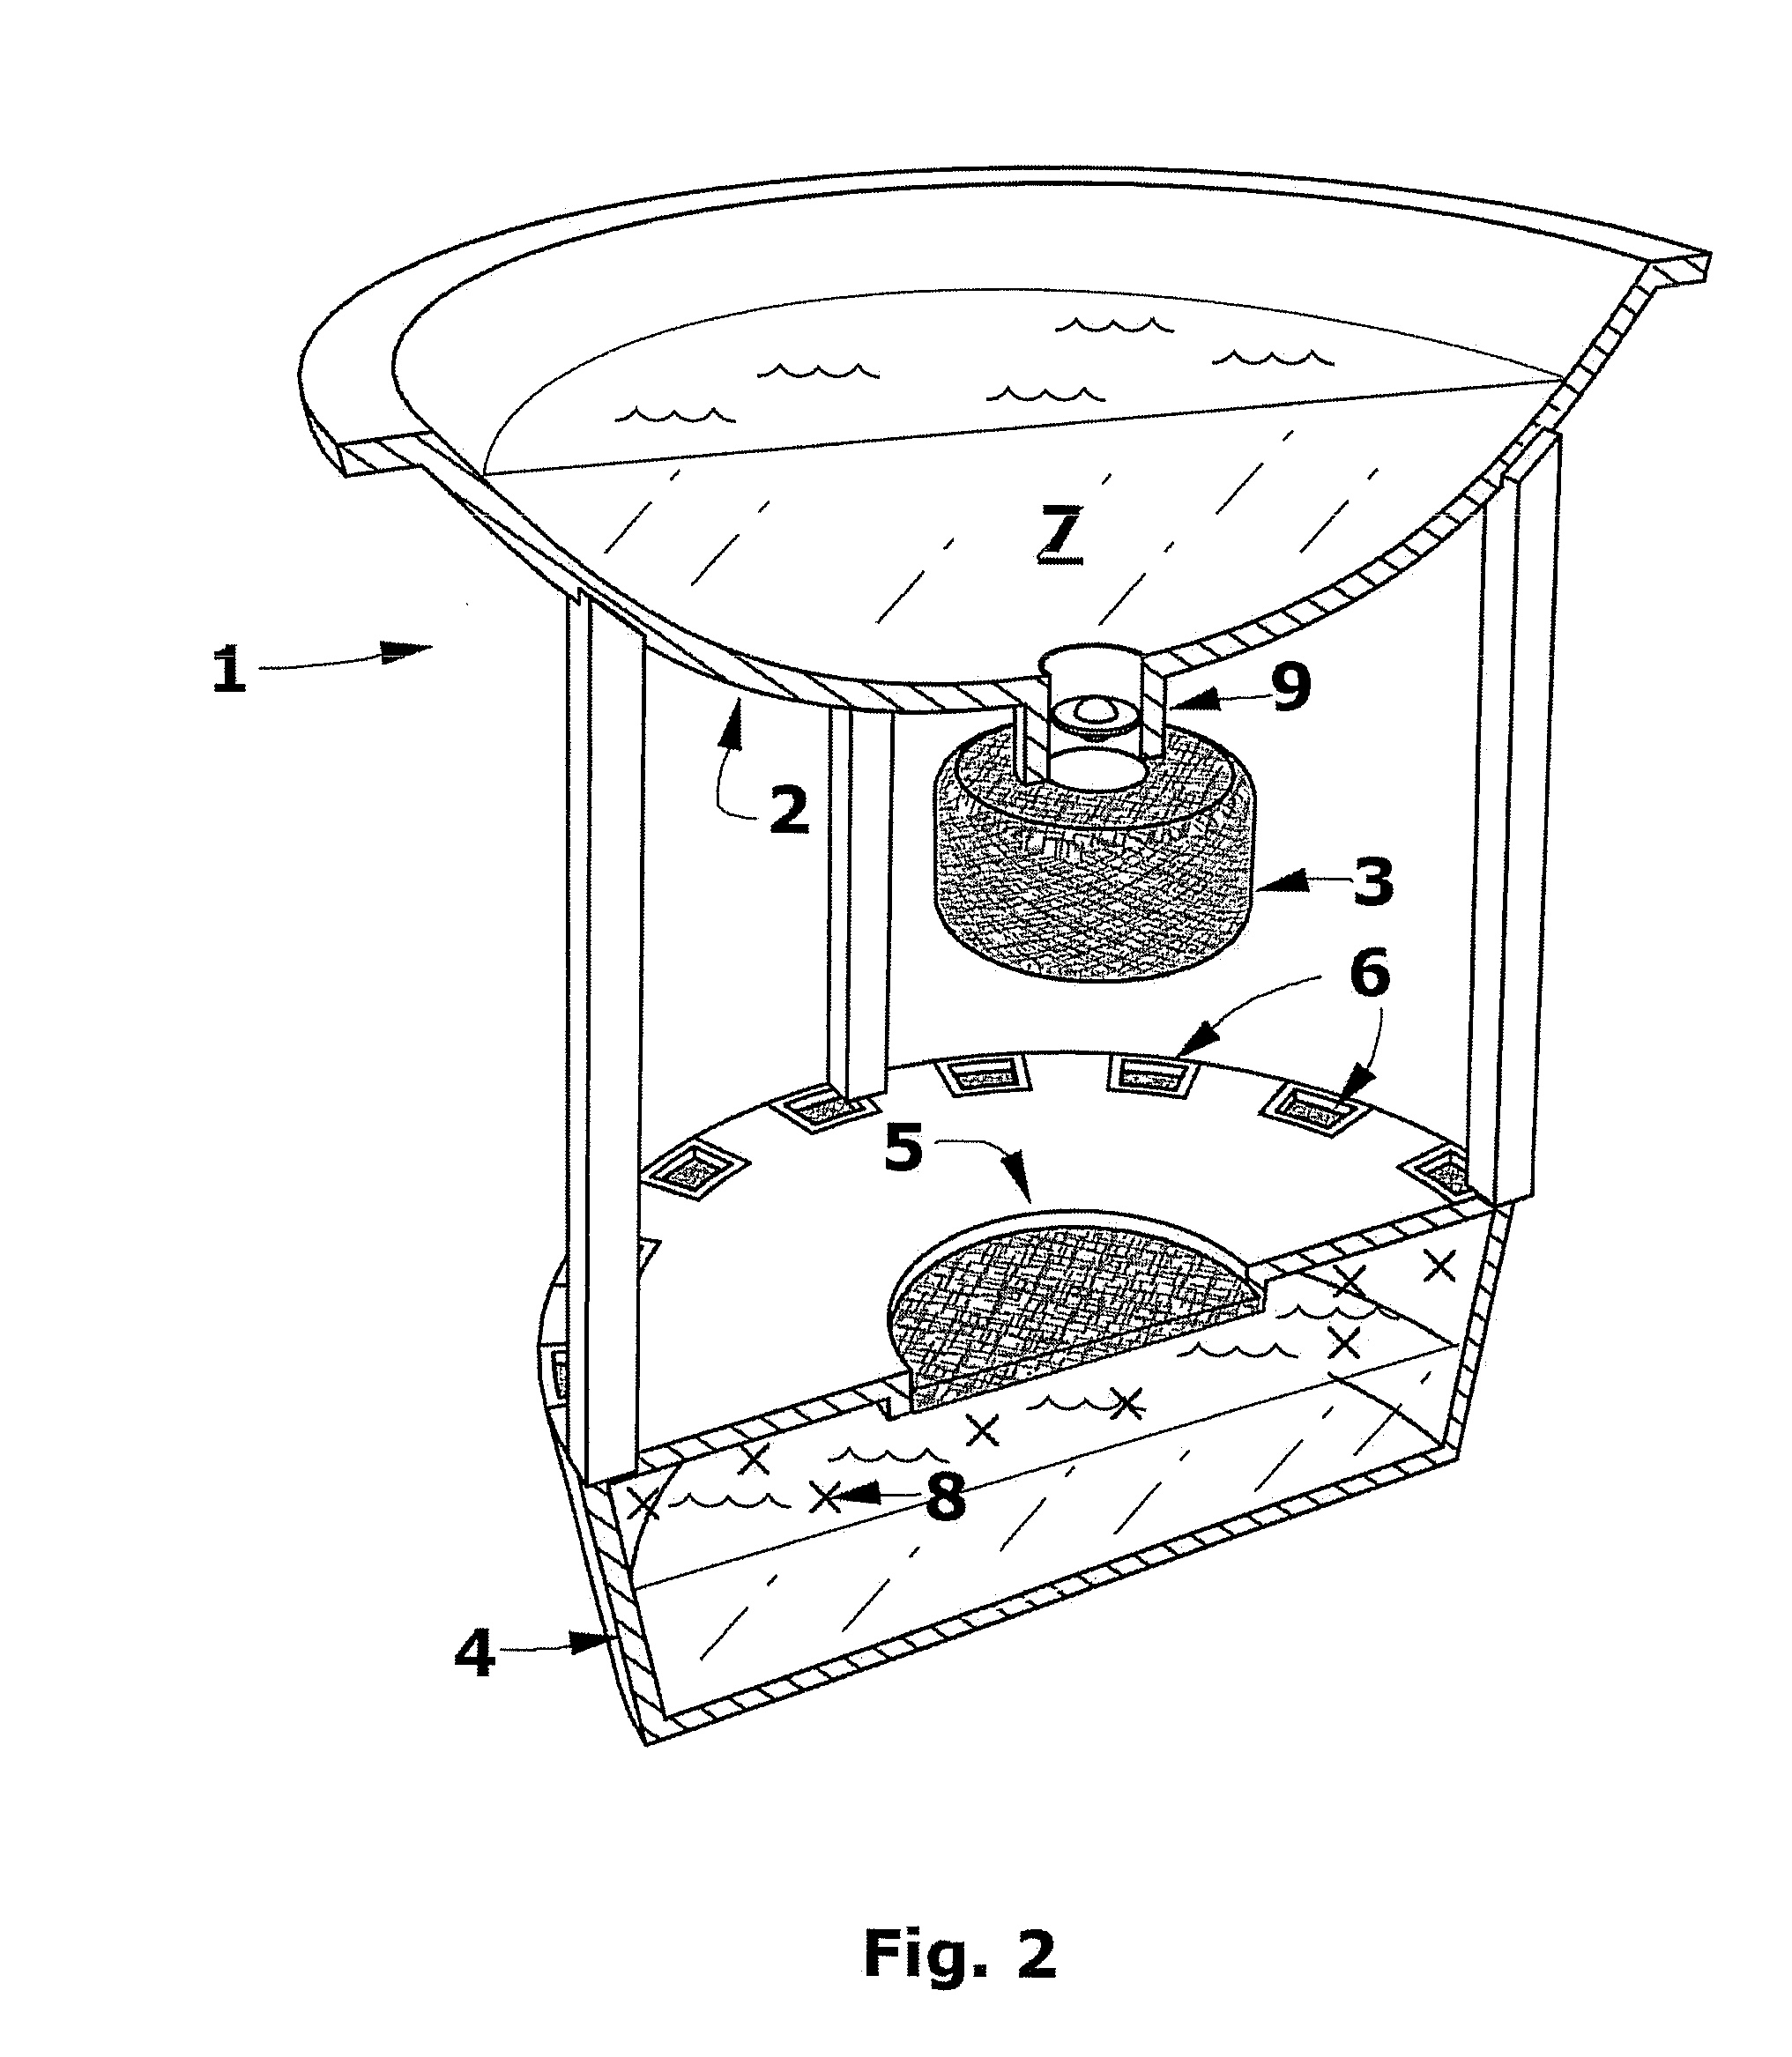 Apparatus and method for controlling maturation of aquatically hatched insects